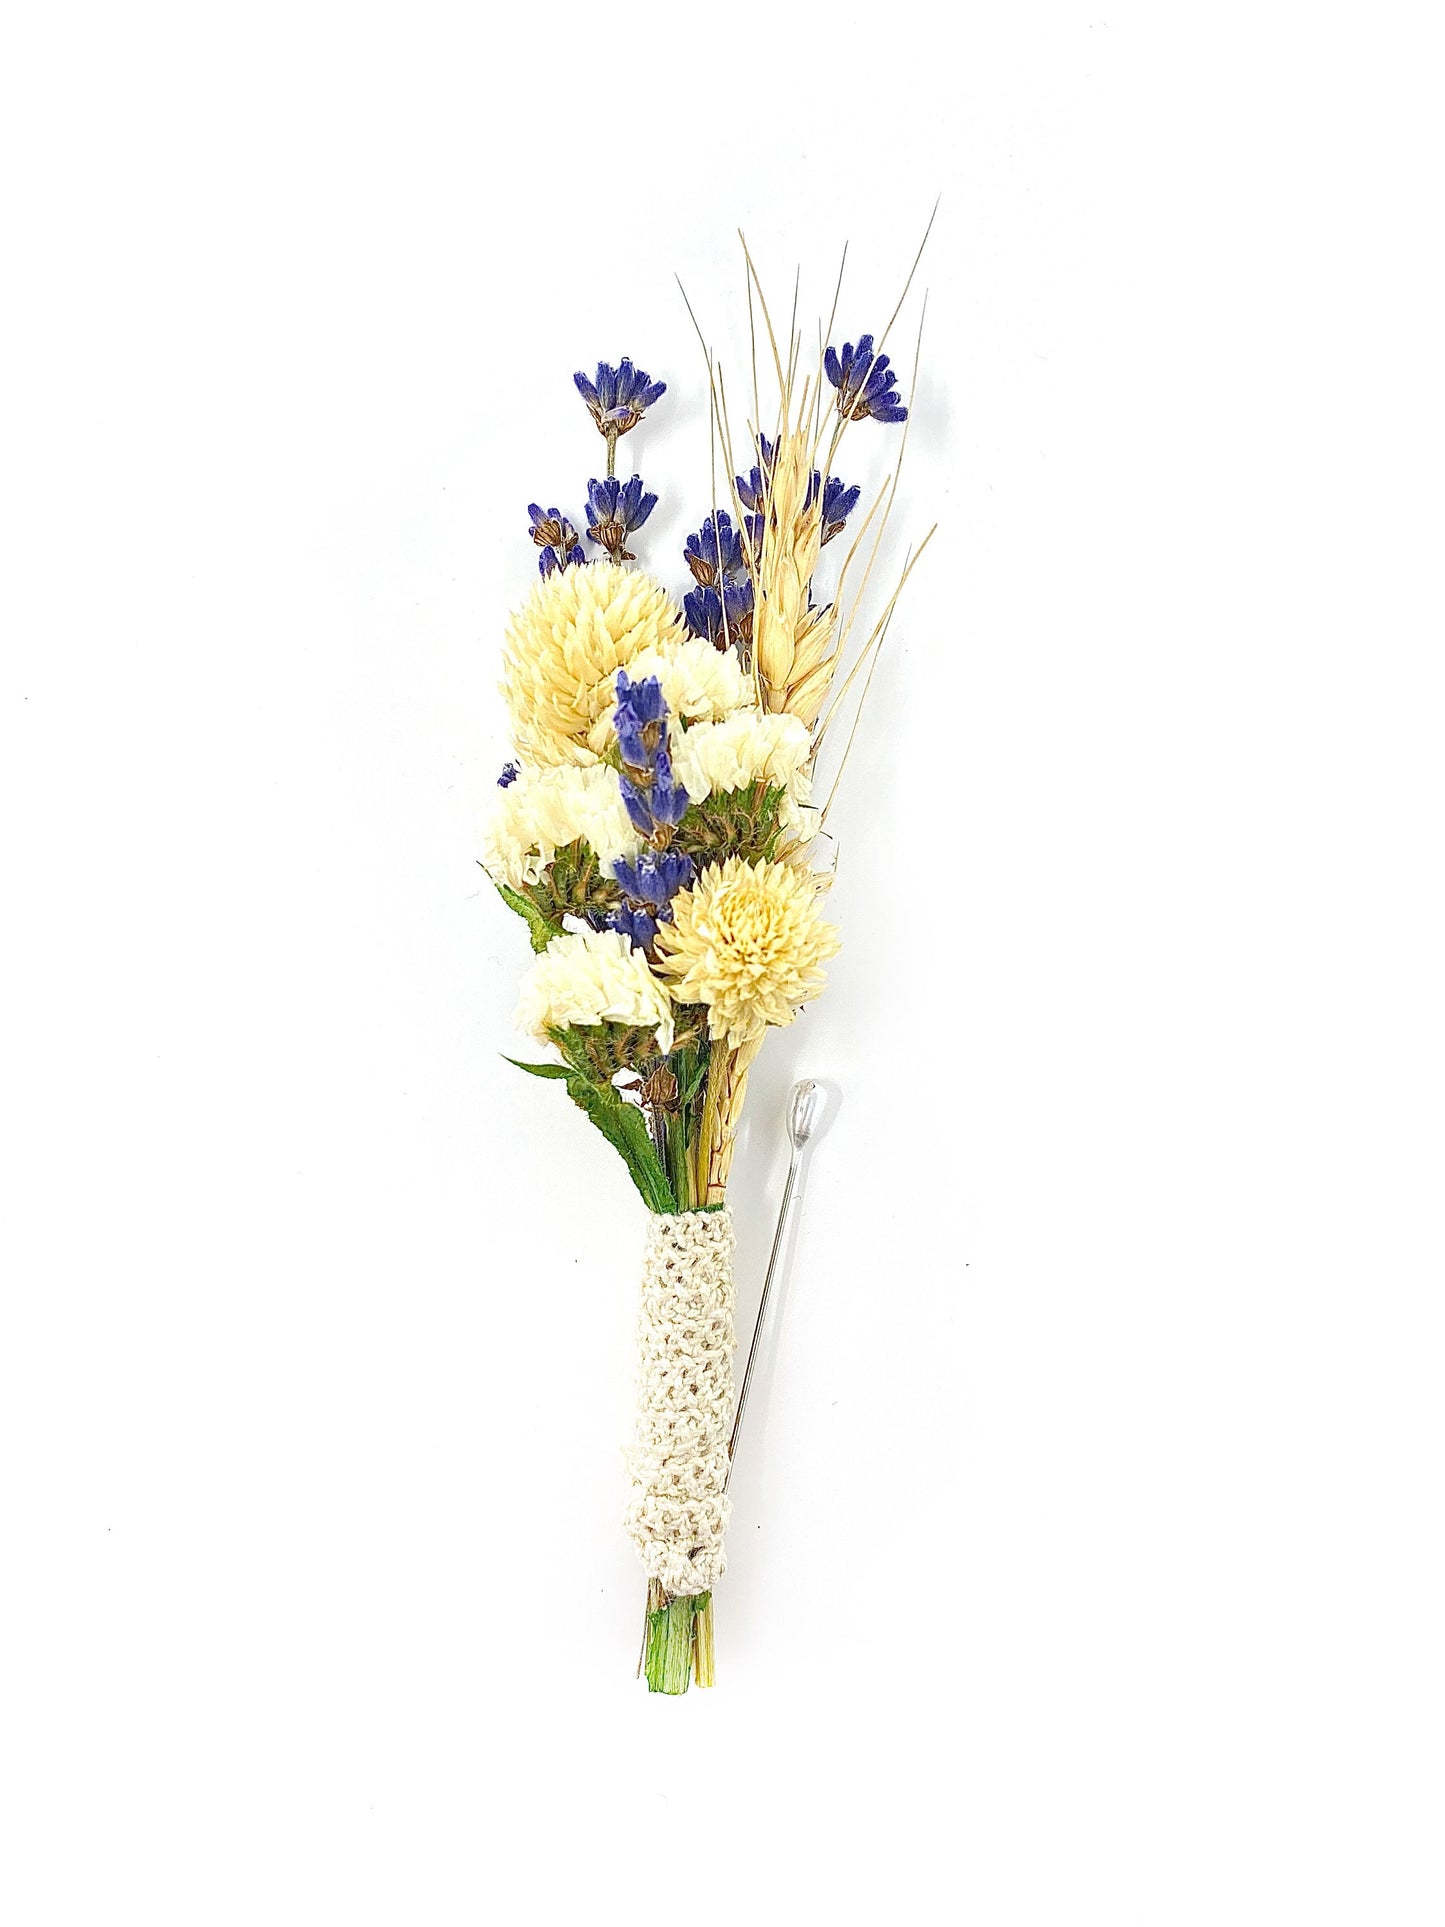 Wedding Boutonniere, Dried Flowers, Preserved Flowers, Bridal Accessories, Lavender, Cream and Purple, Wheat